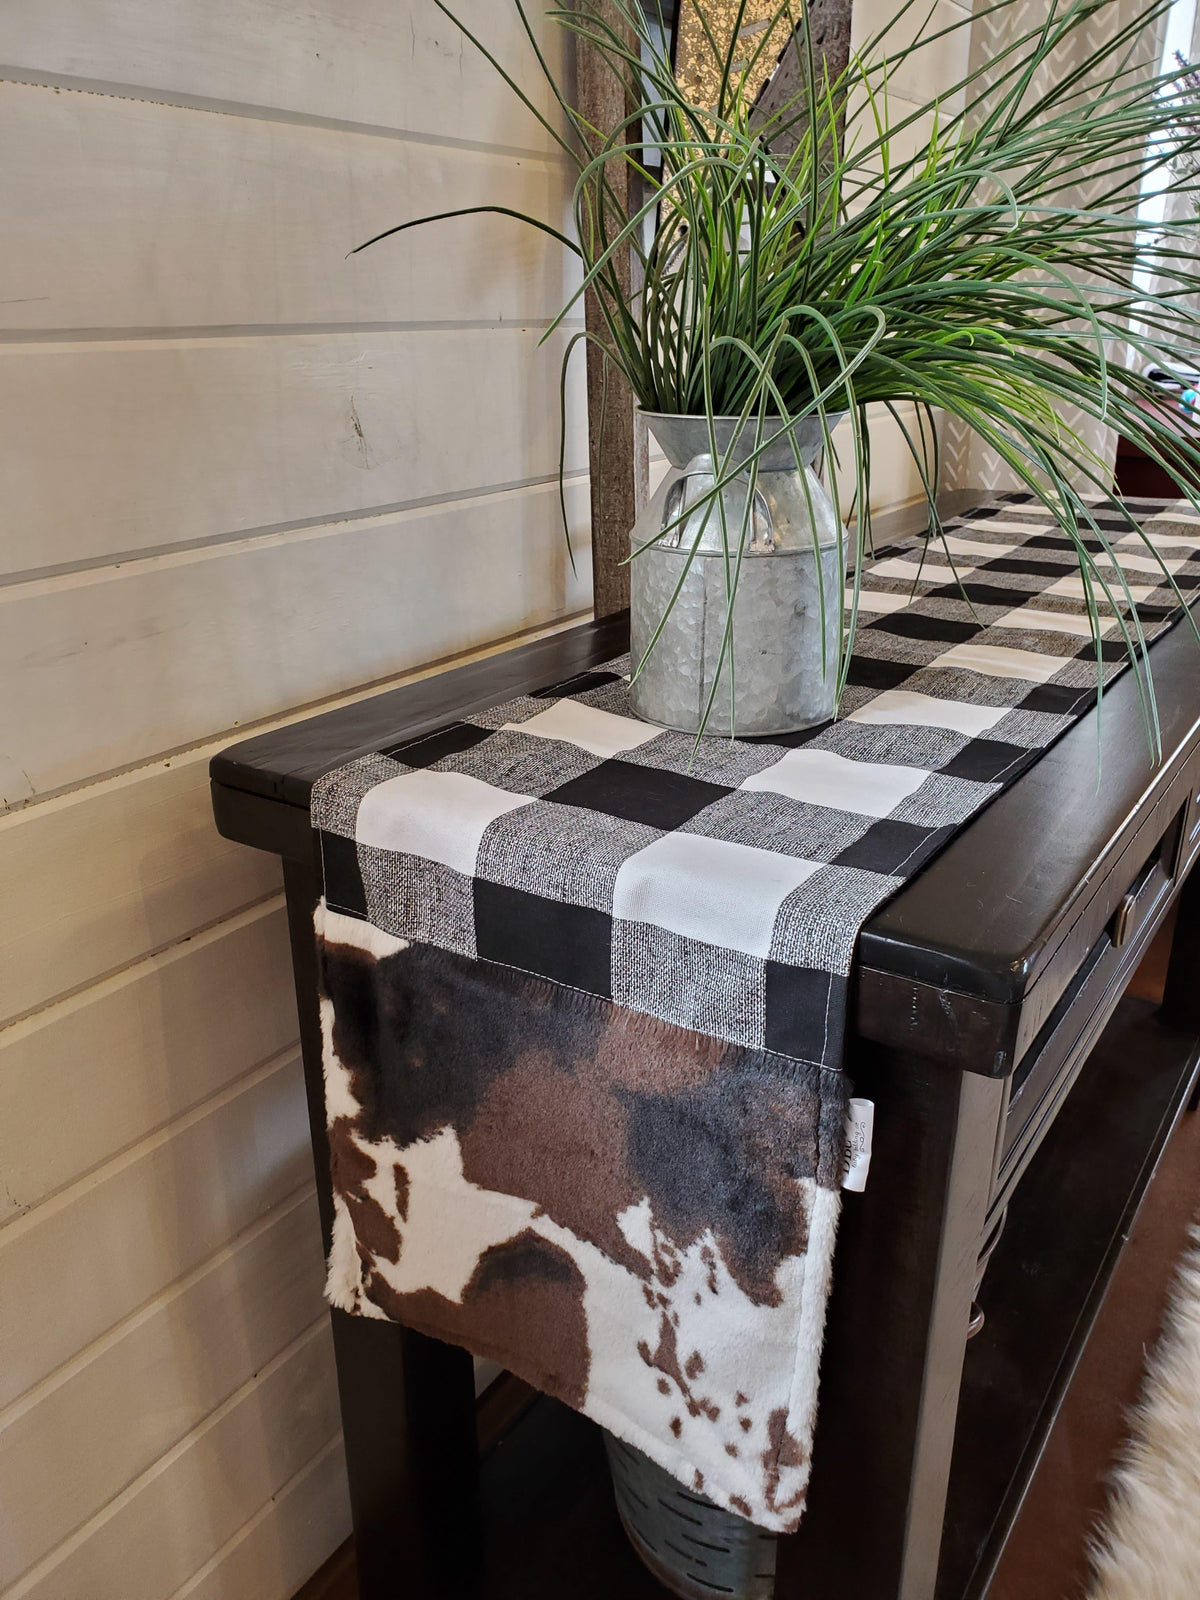 Home Decor- Table Runner -Black White Check with Cow Minky decorative ends - DBC Baby Bedding Co 